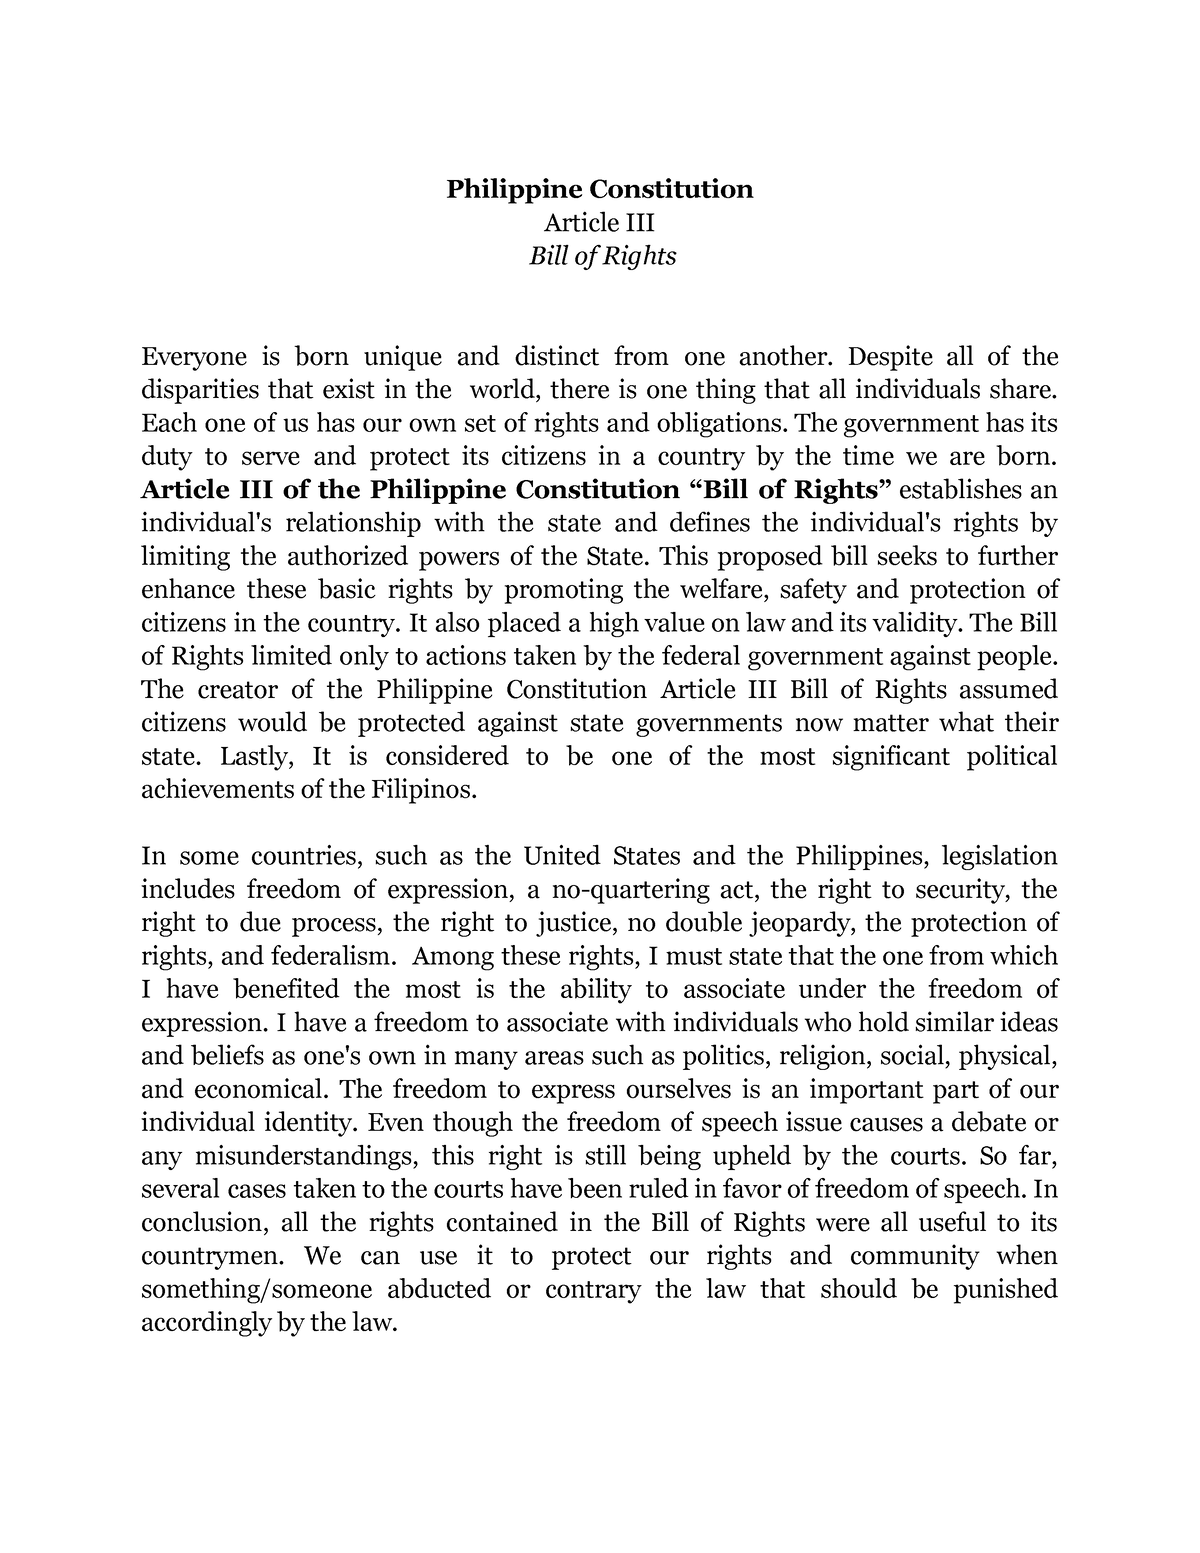 NSTP Essay - Philippine Constitution Article III Bill of Rights ...